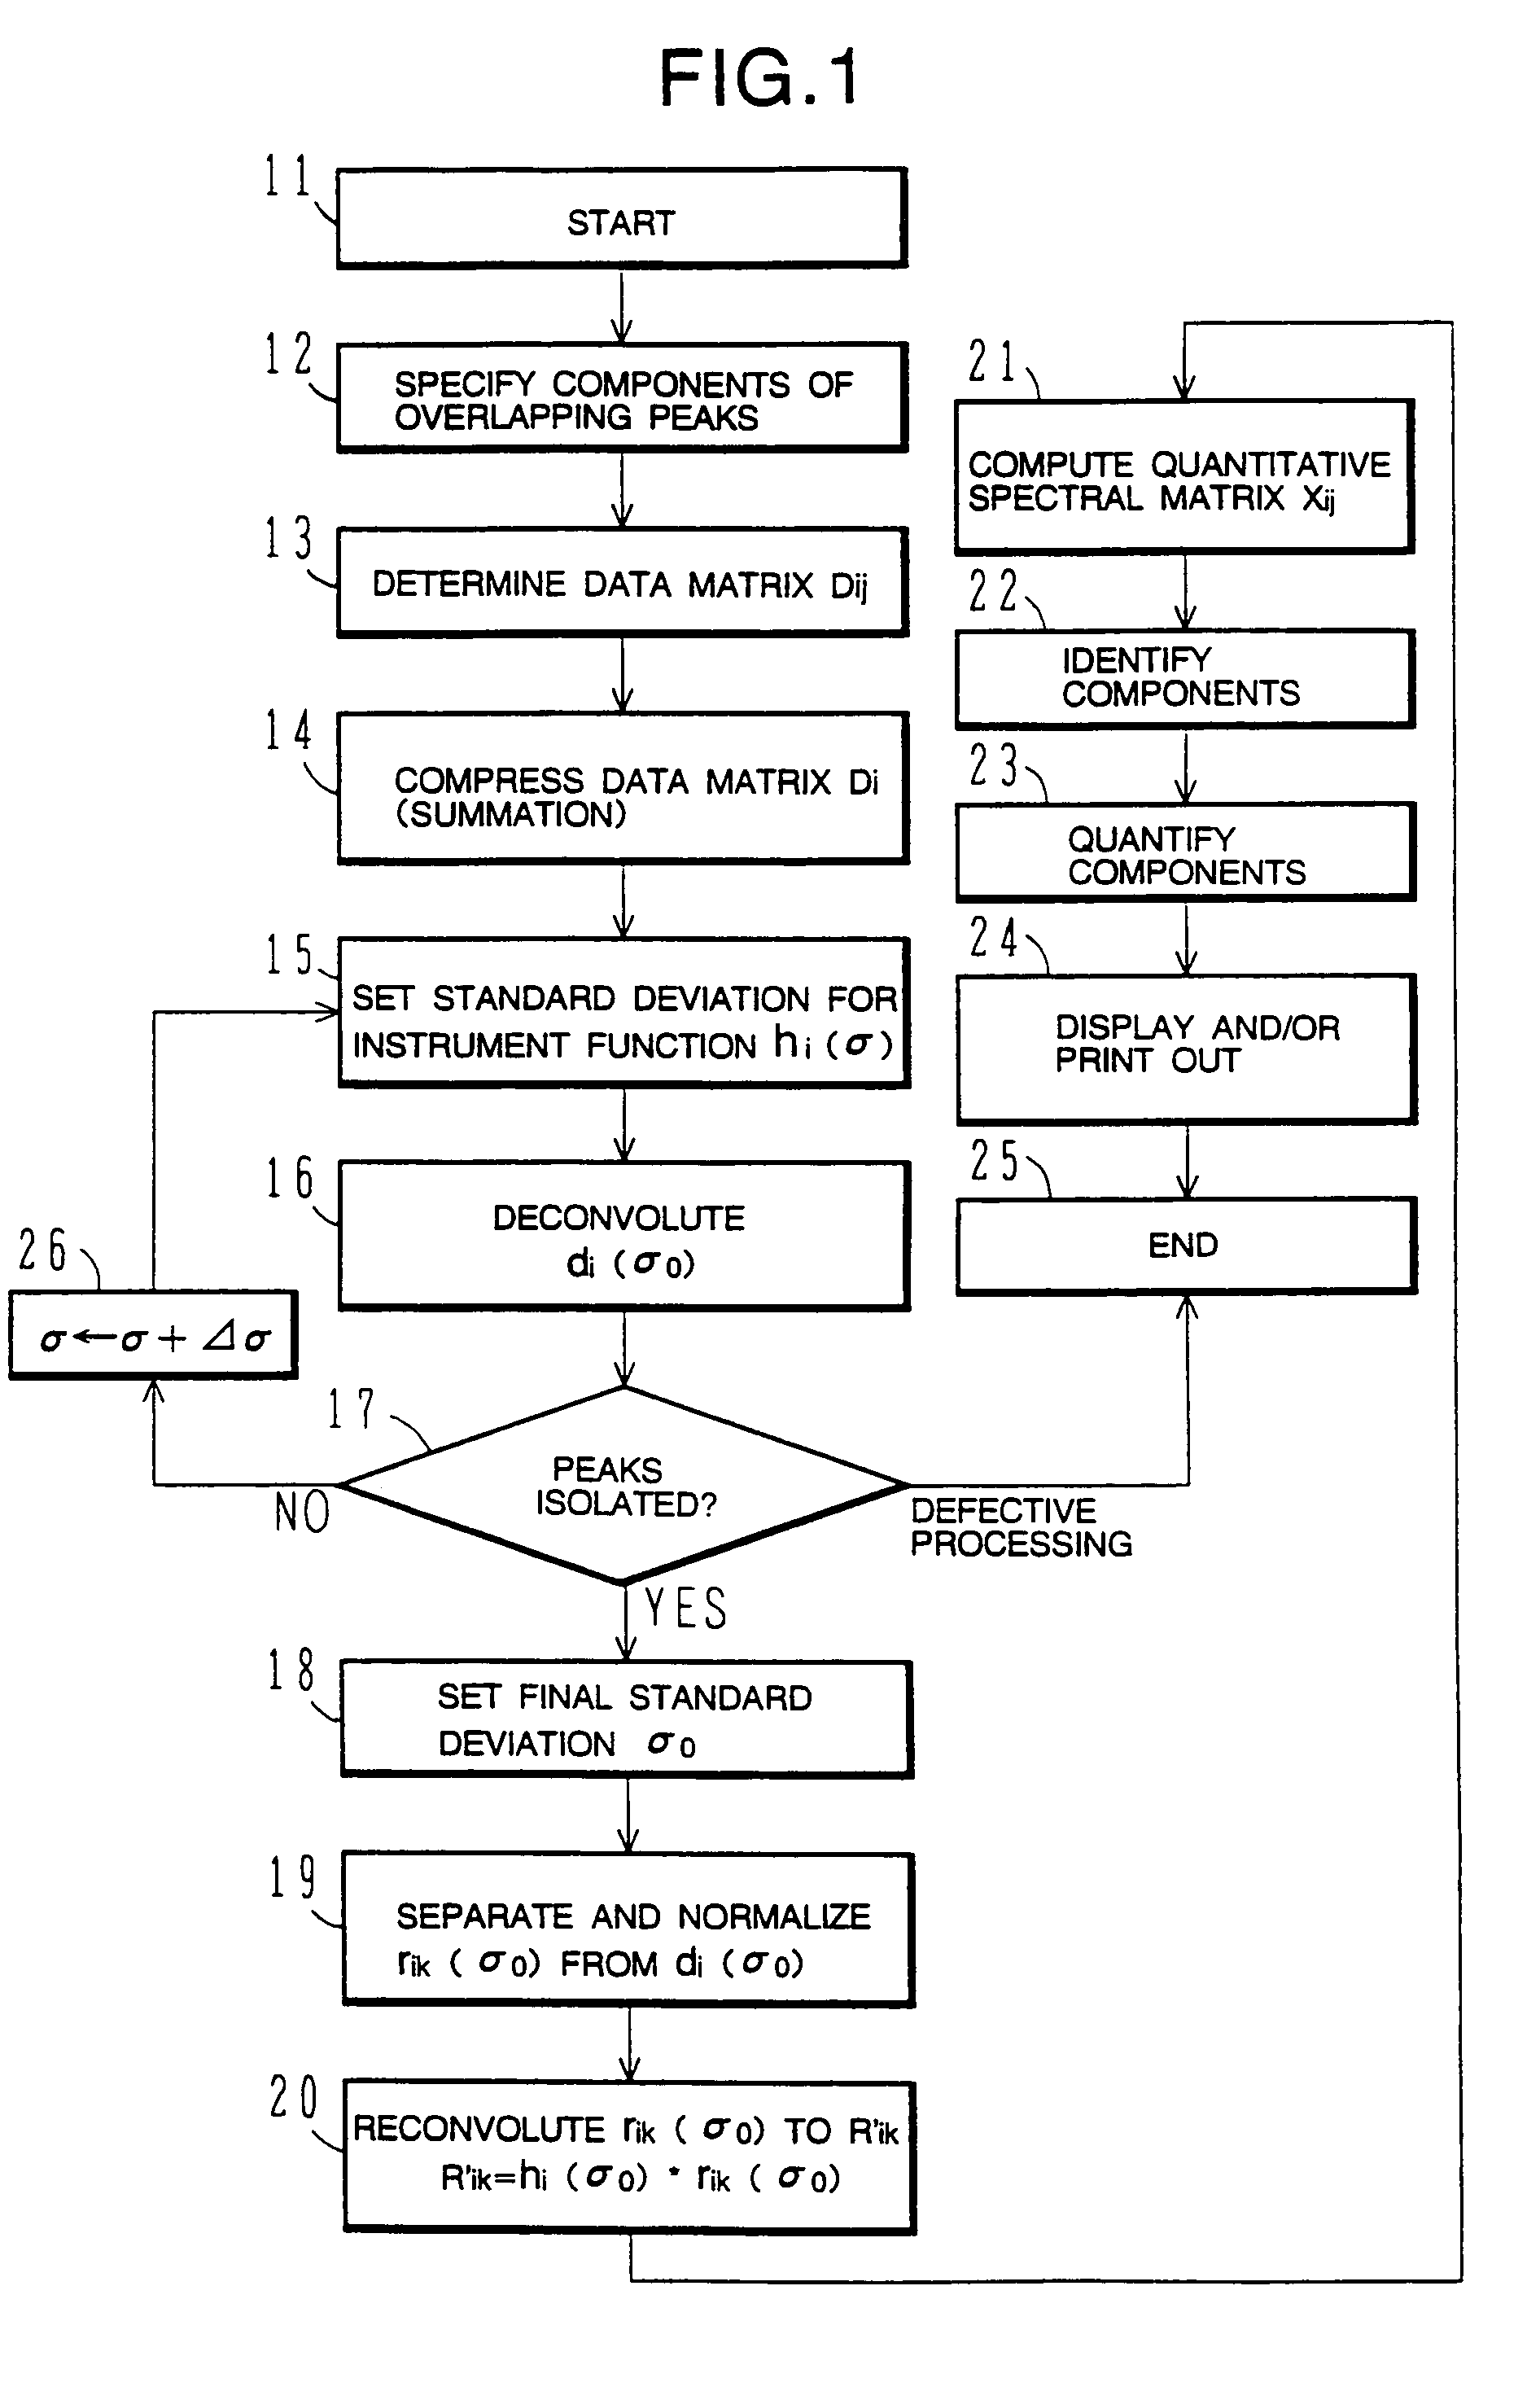 Method and apparatus for analyzing multi-channel chromatogram